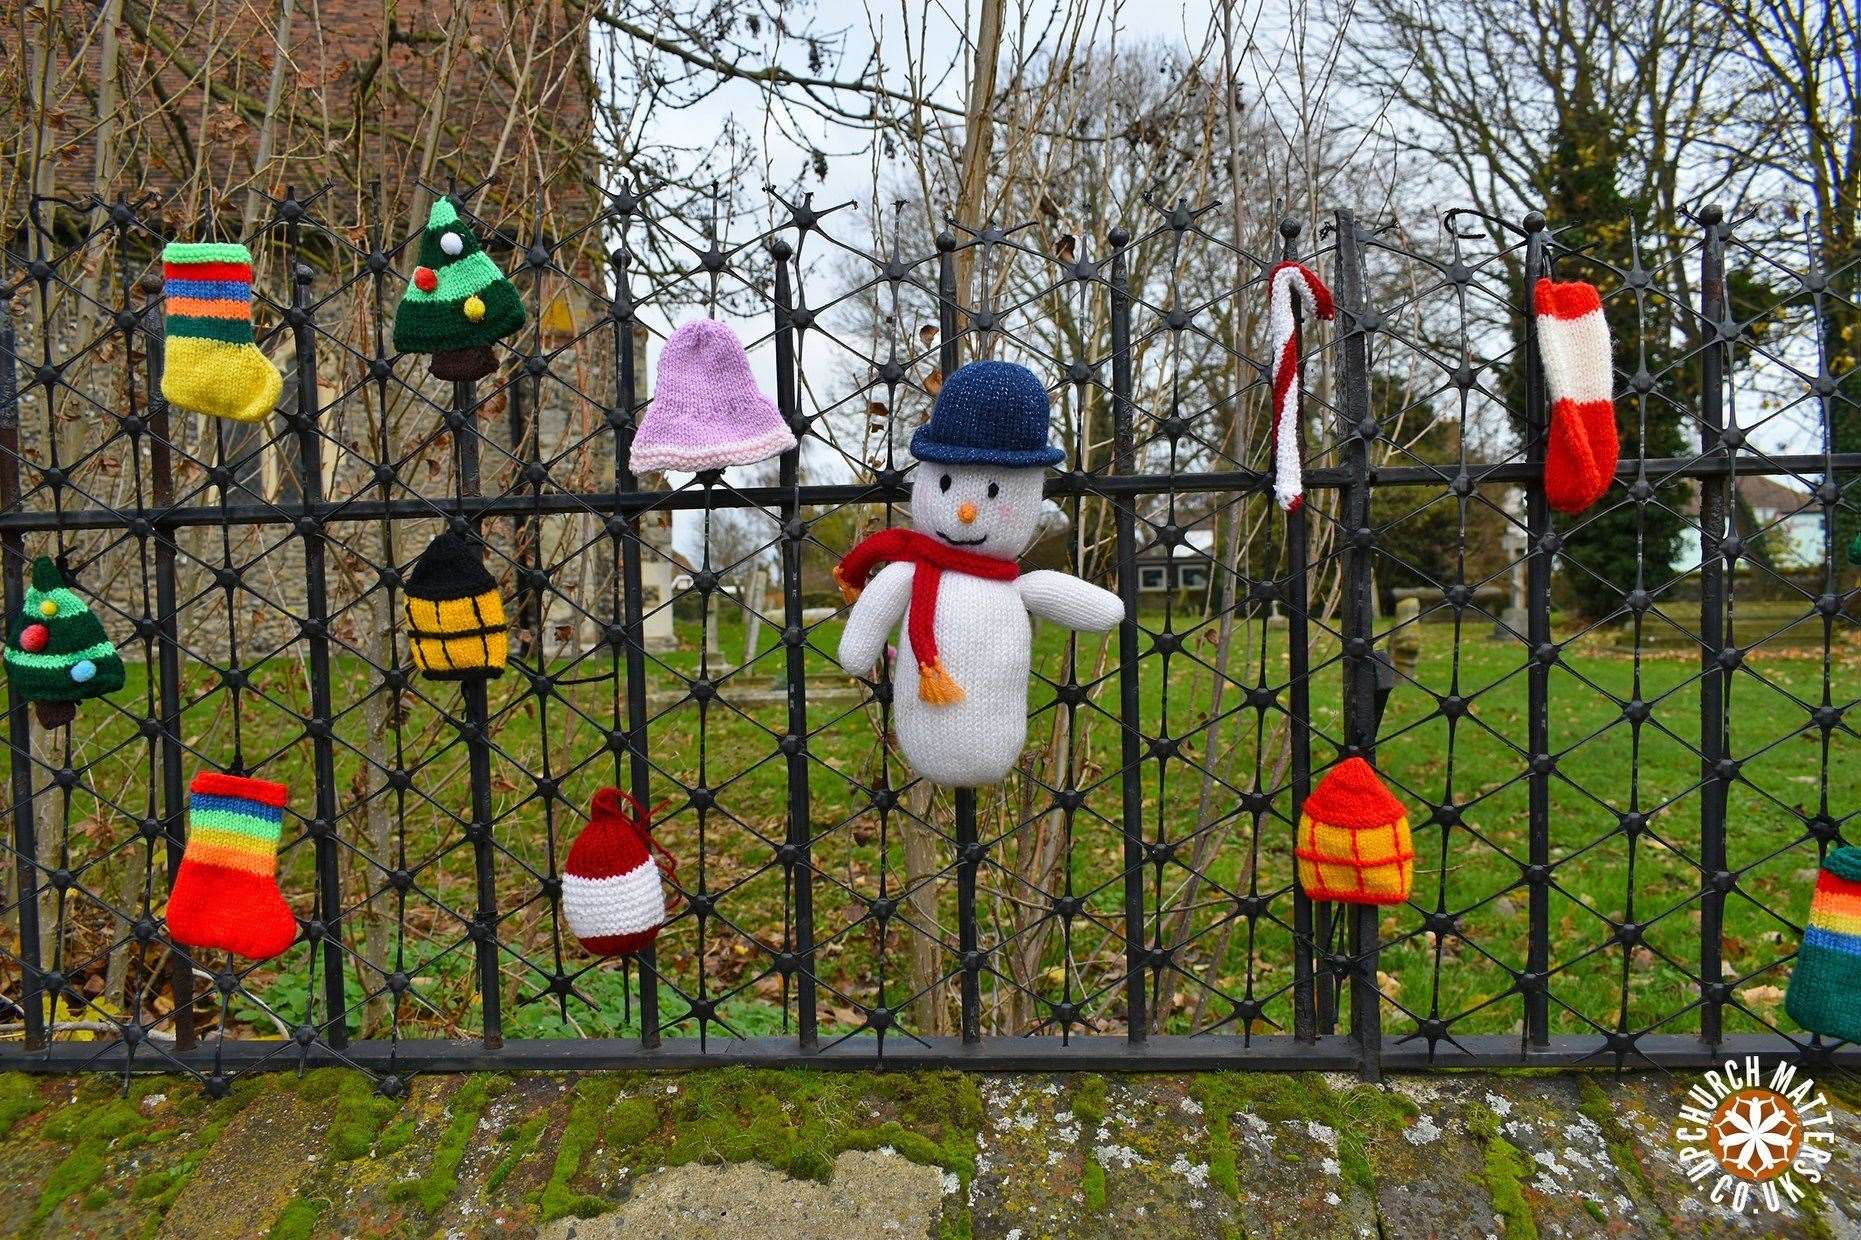 The railings have been decorated with hand-knitted characters. Picture: Upchurch Matters